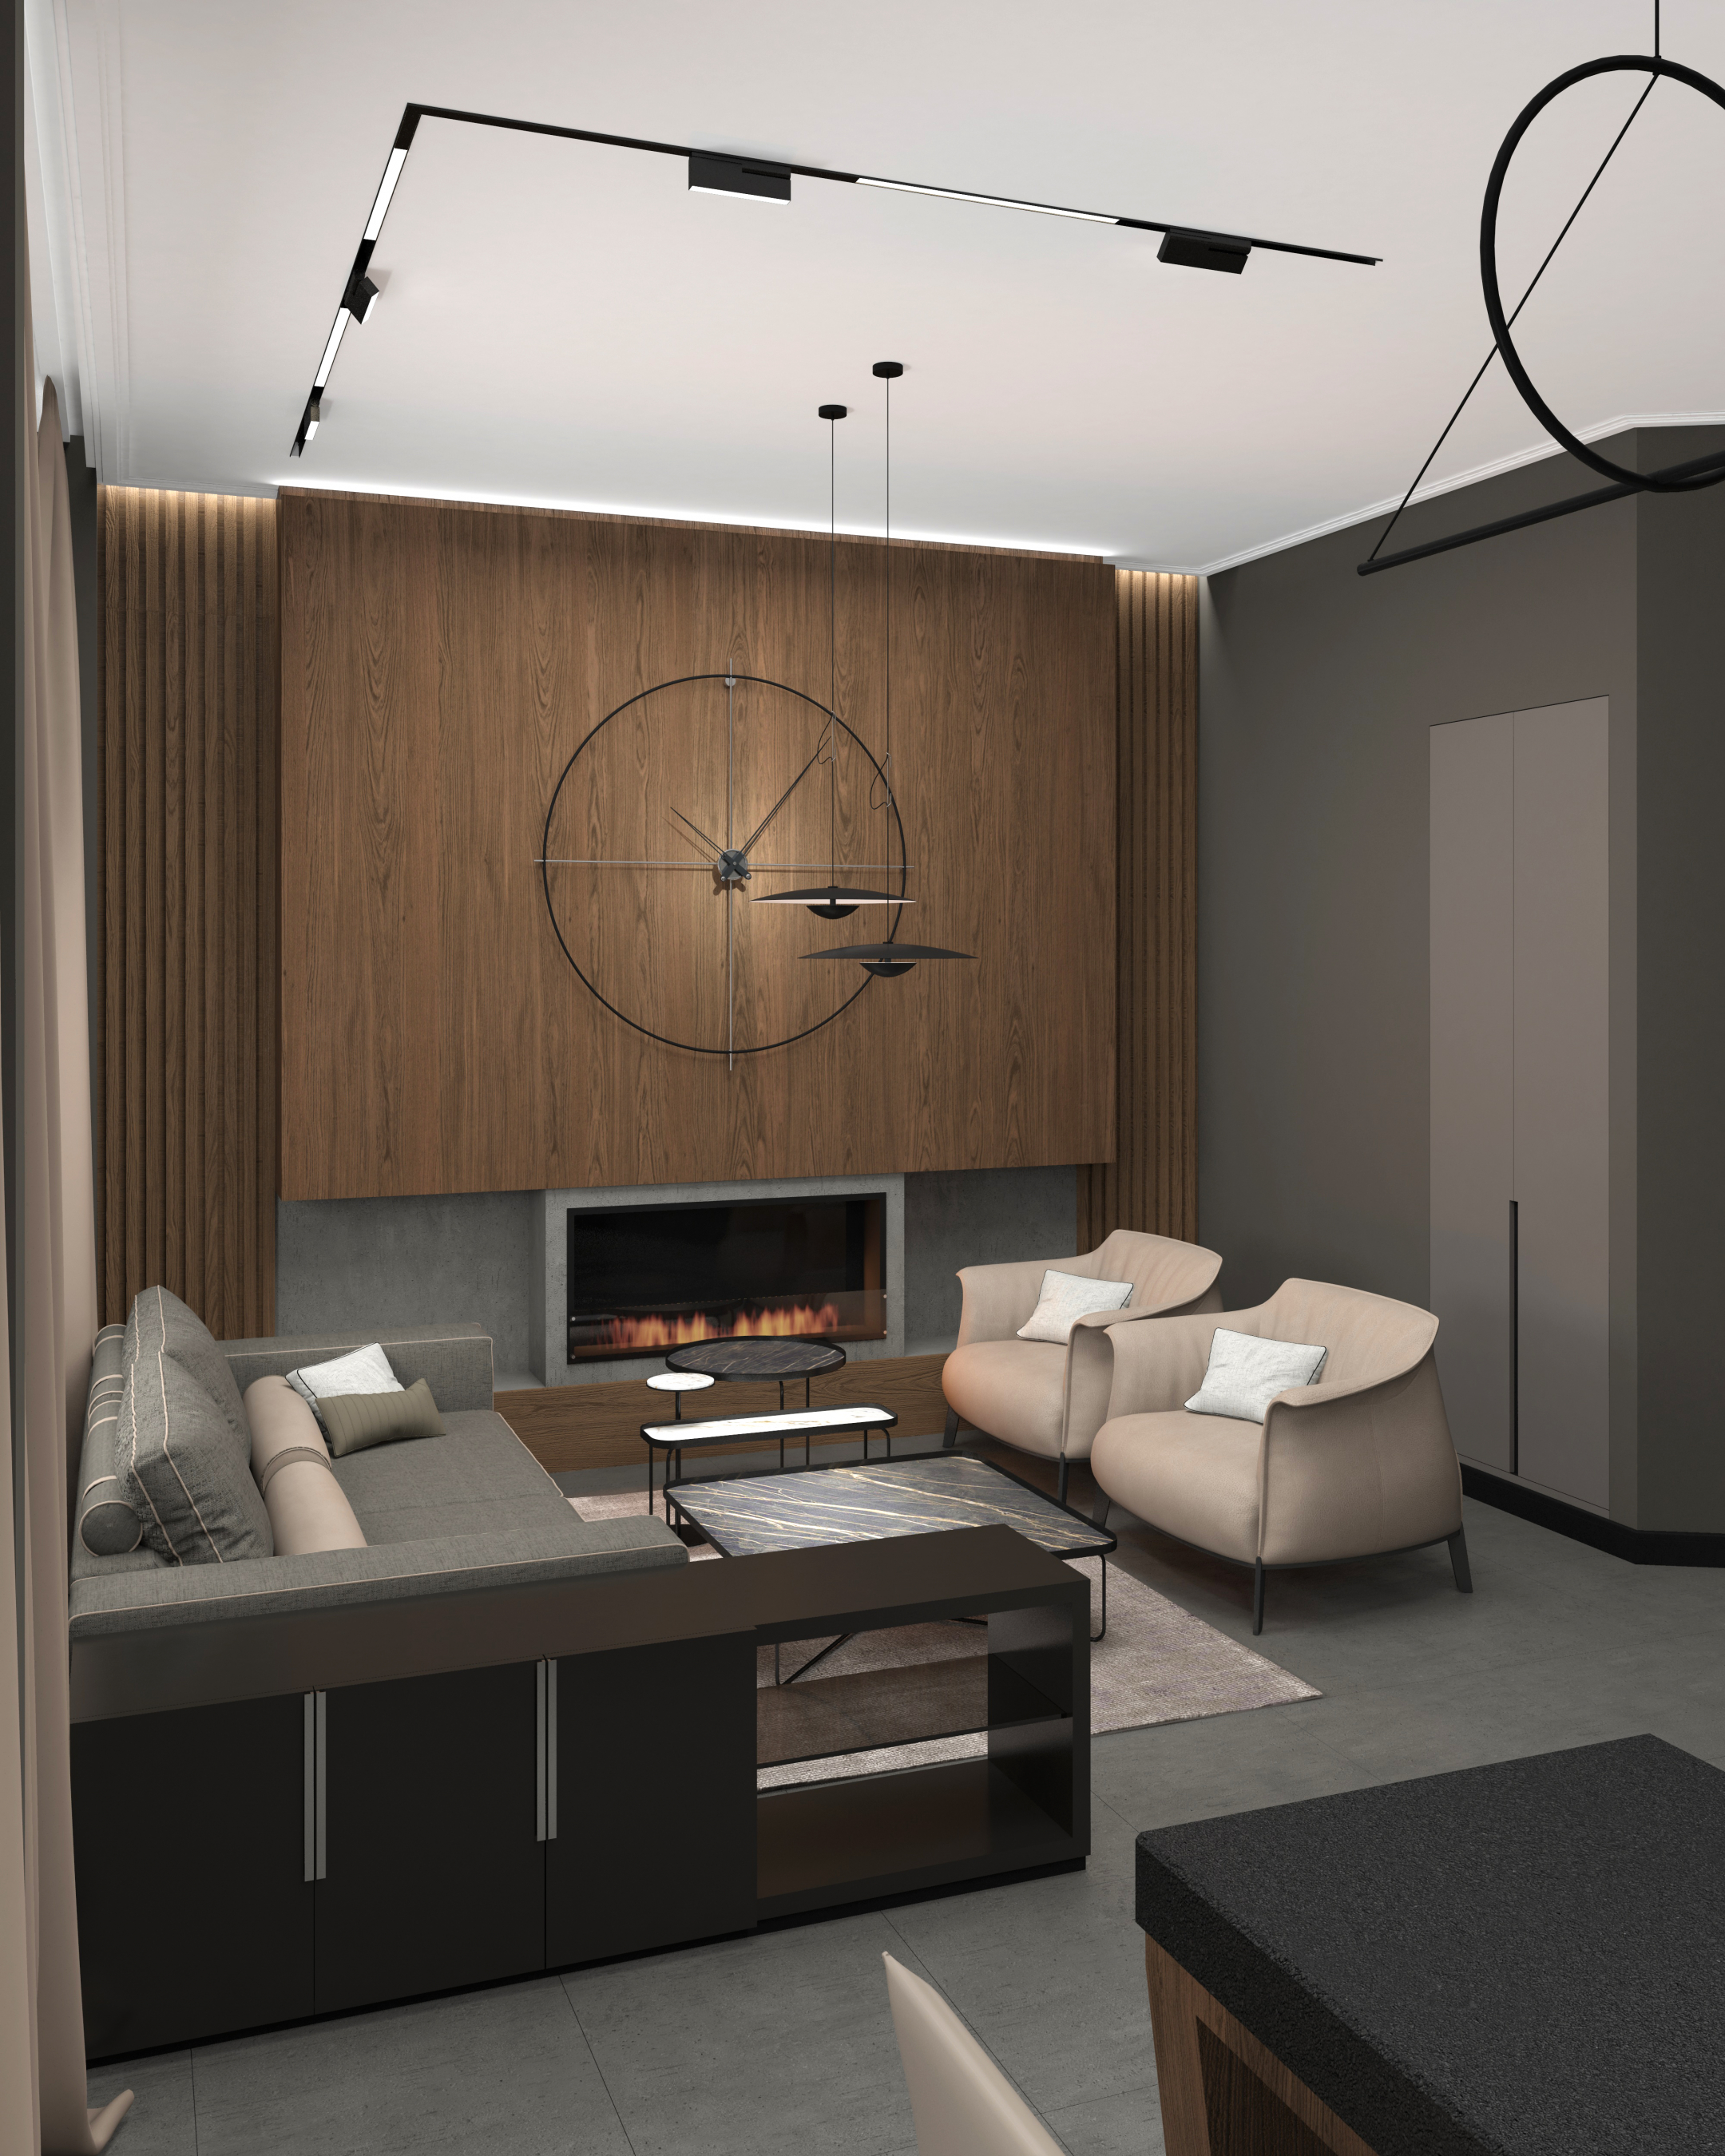 VIP meeting room in 3d max vray 3.0 image